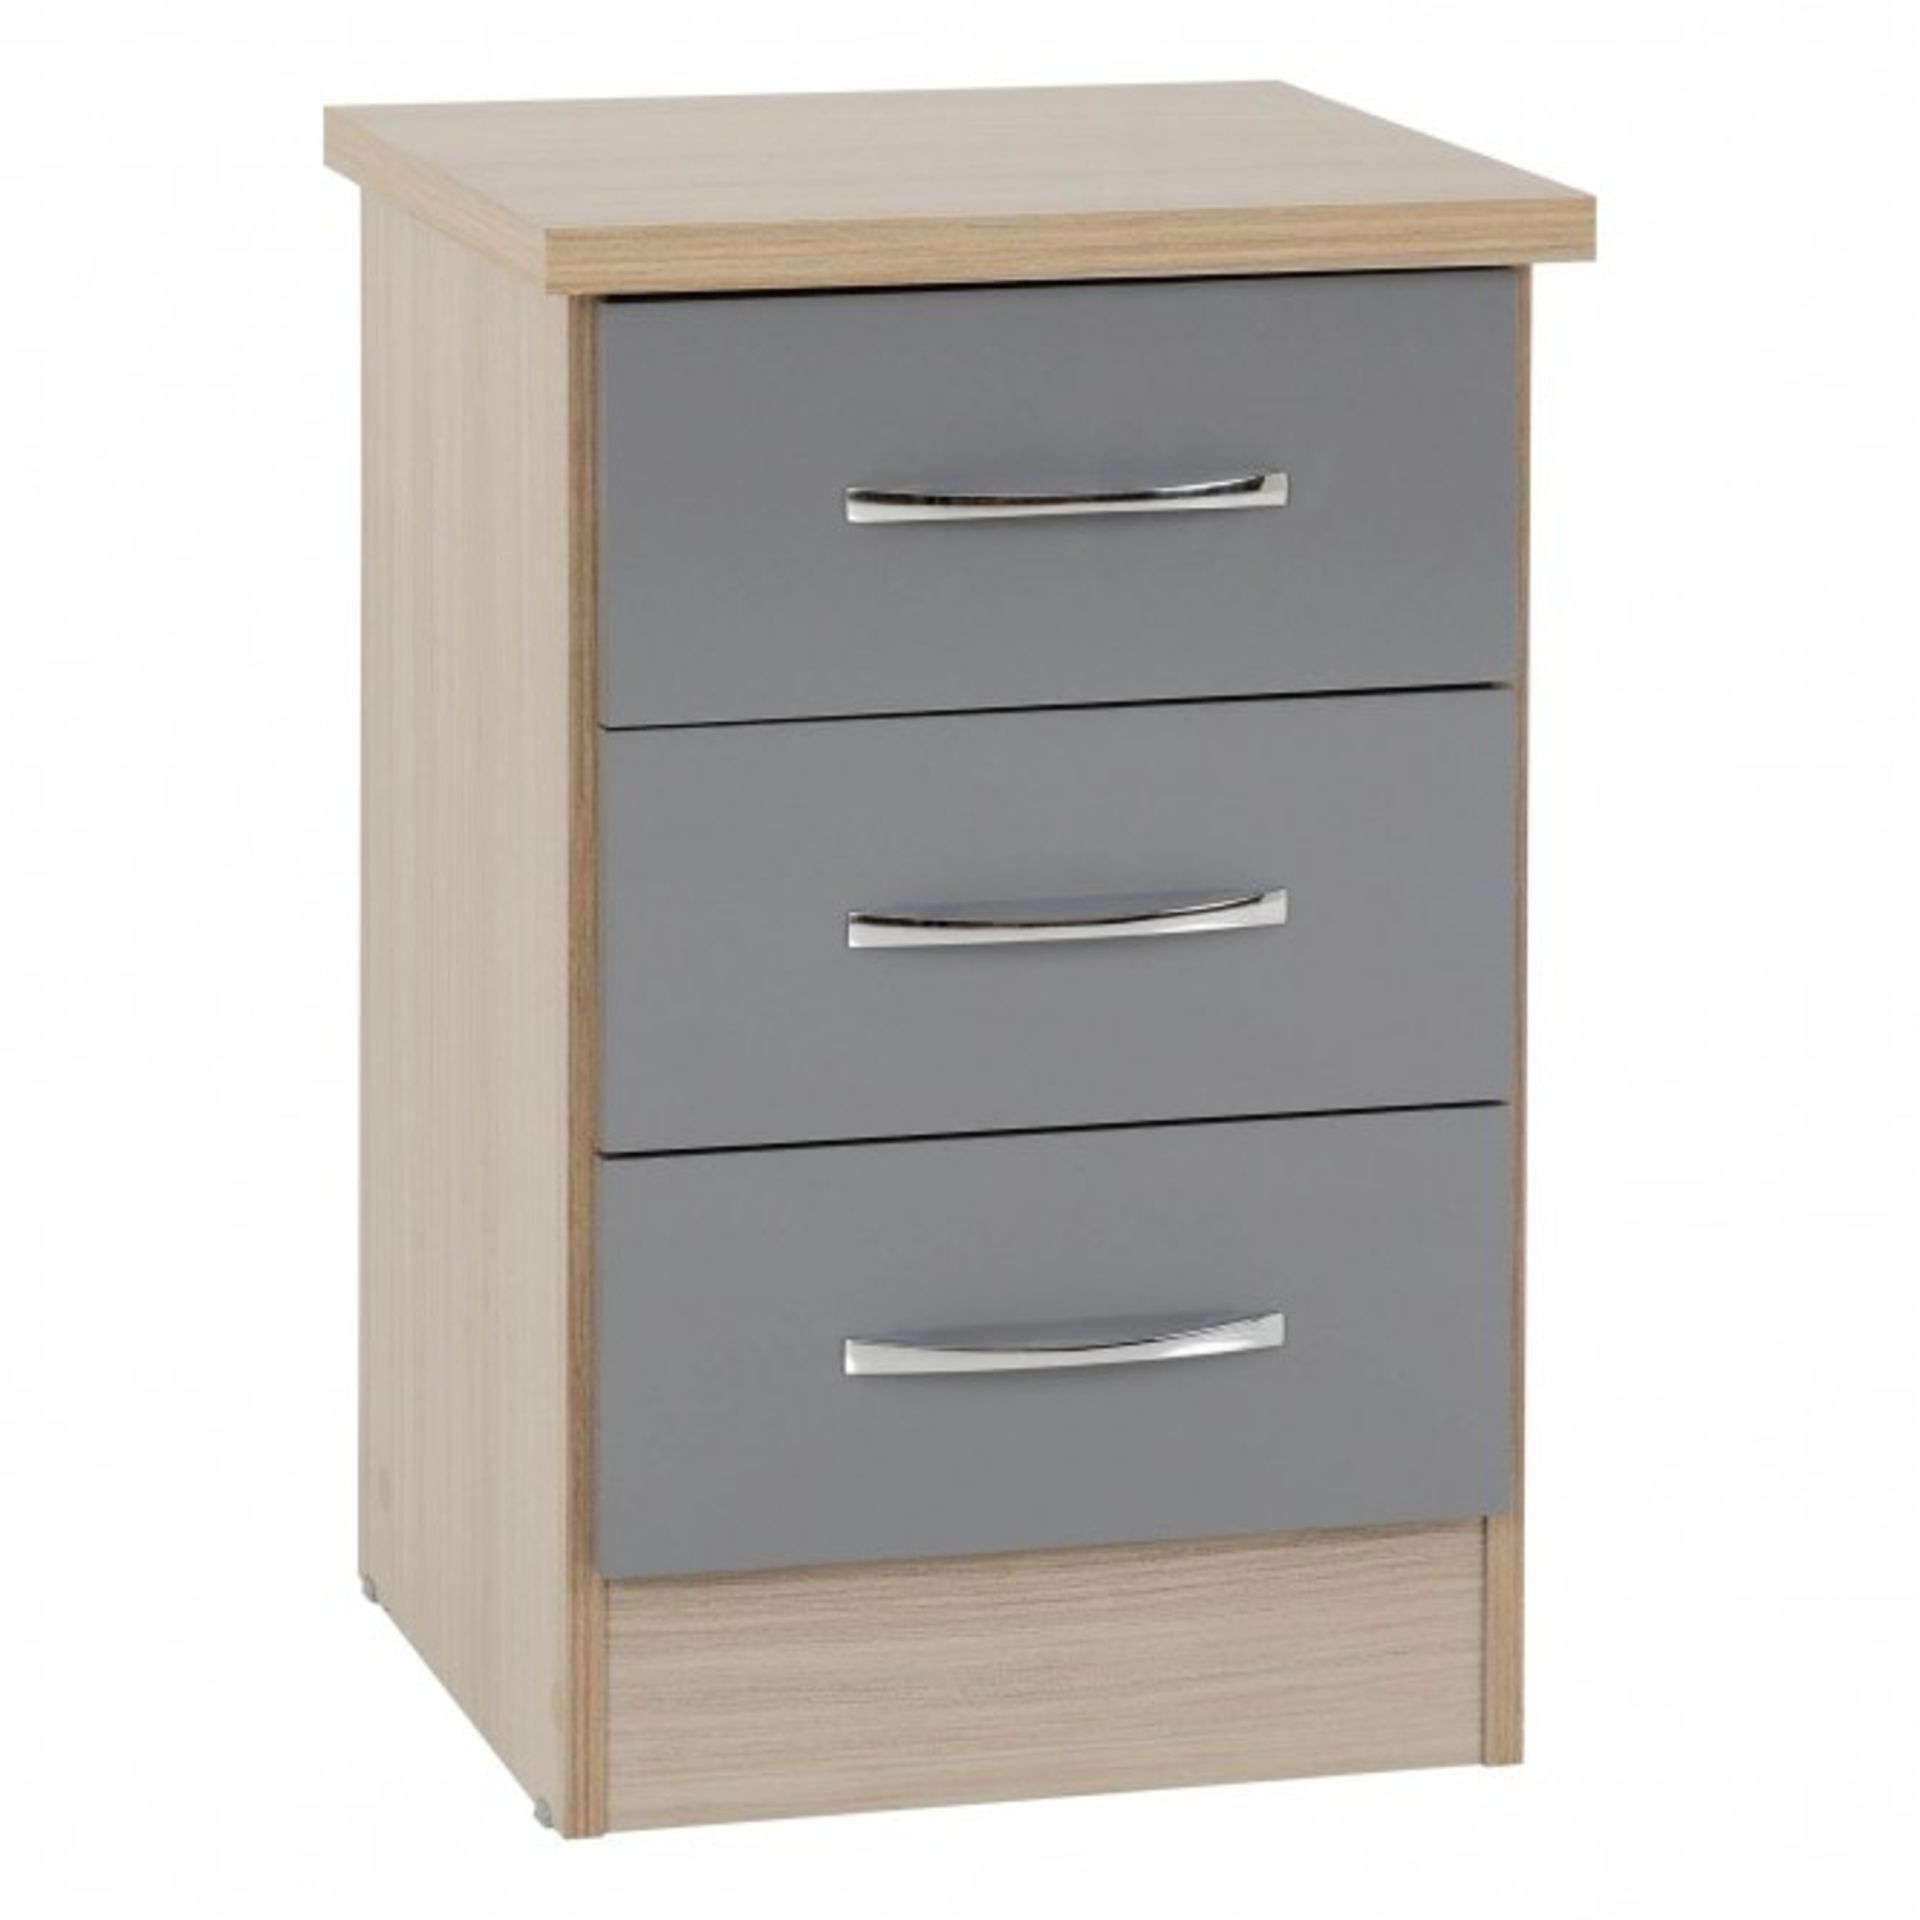 Nevada Grey 3 Drawer Bedside Chest - RRP £120.99